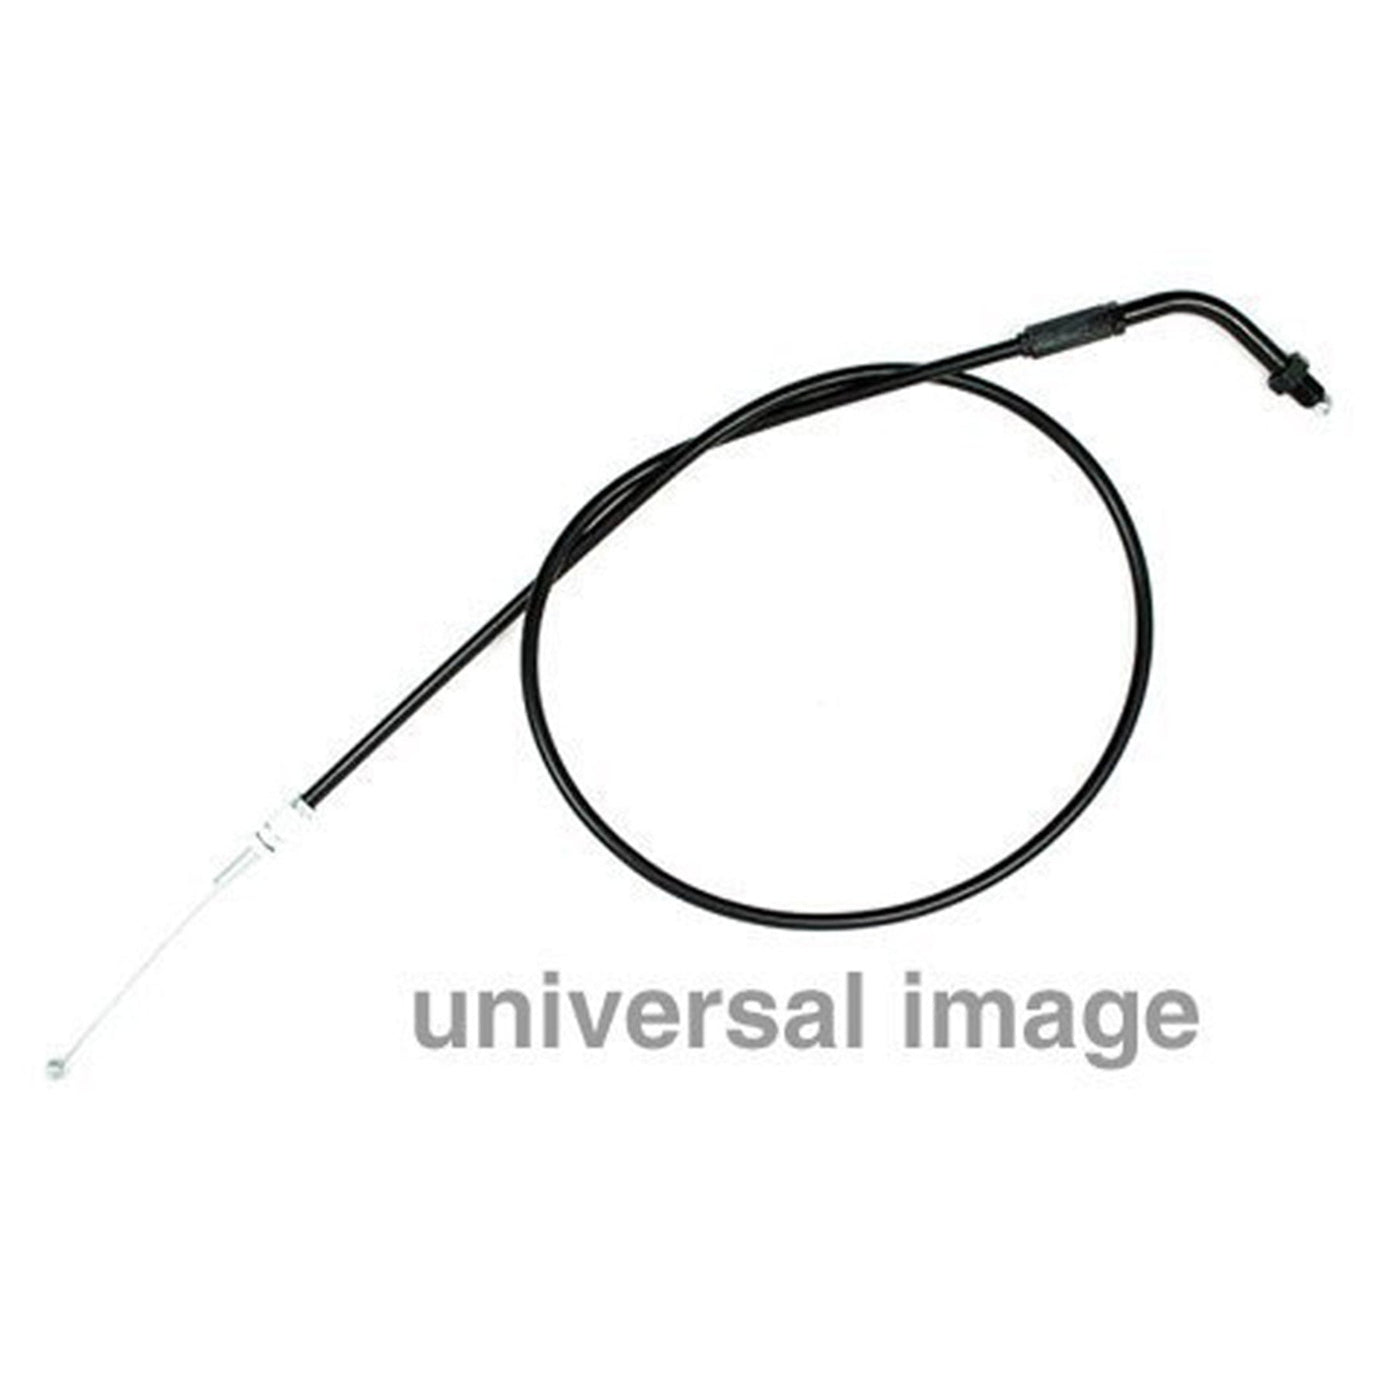 SPI 05-139-99 Throttle Cable #05-139-99